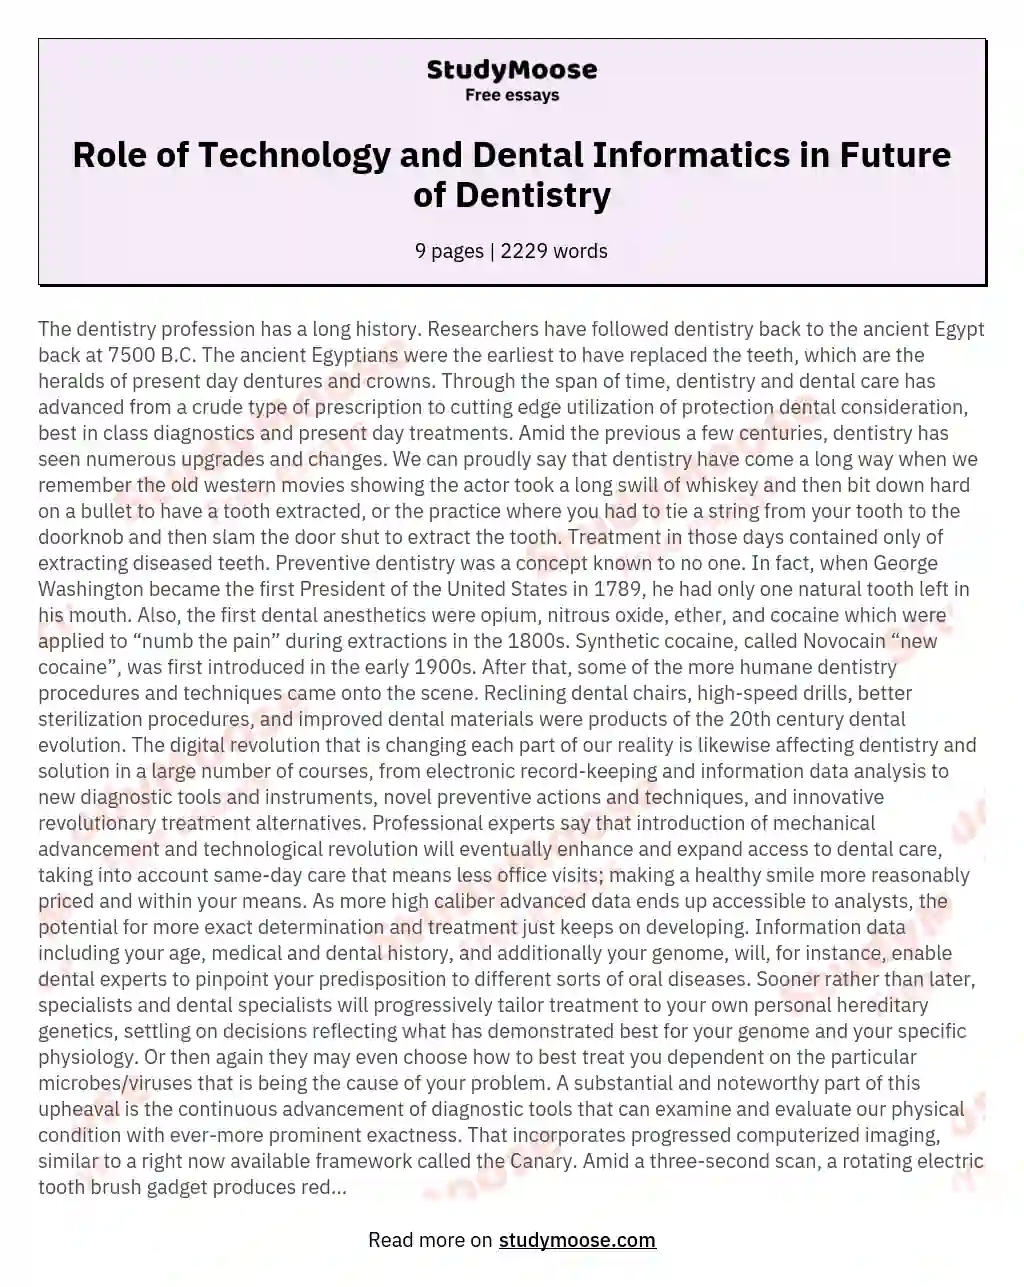 Role of Technology and Dental Informatics in Future of Dentistry essay